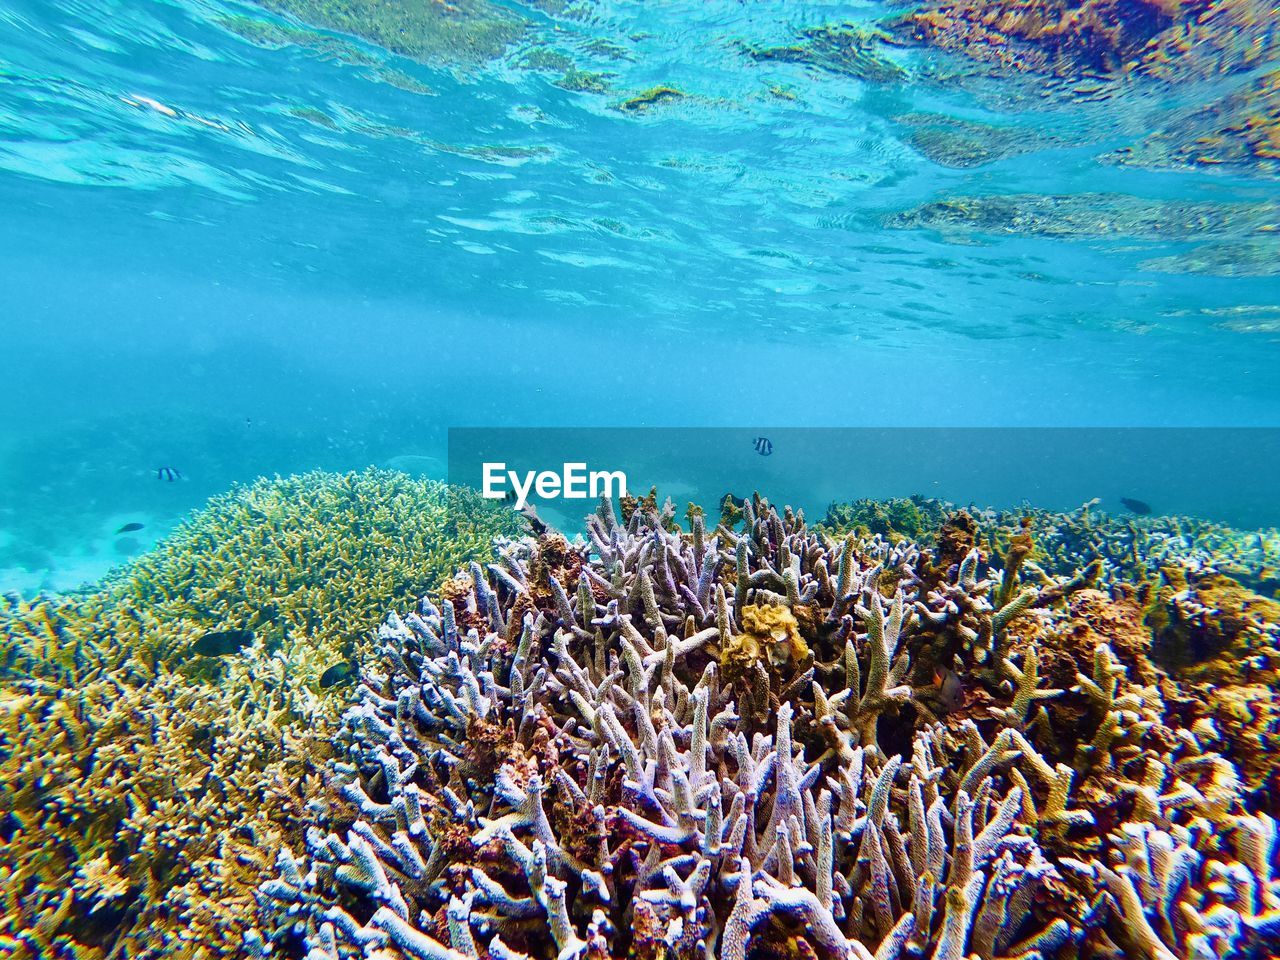 VIEW OF CORAL UNDERWATER